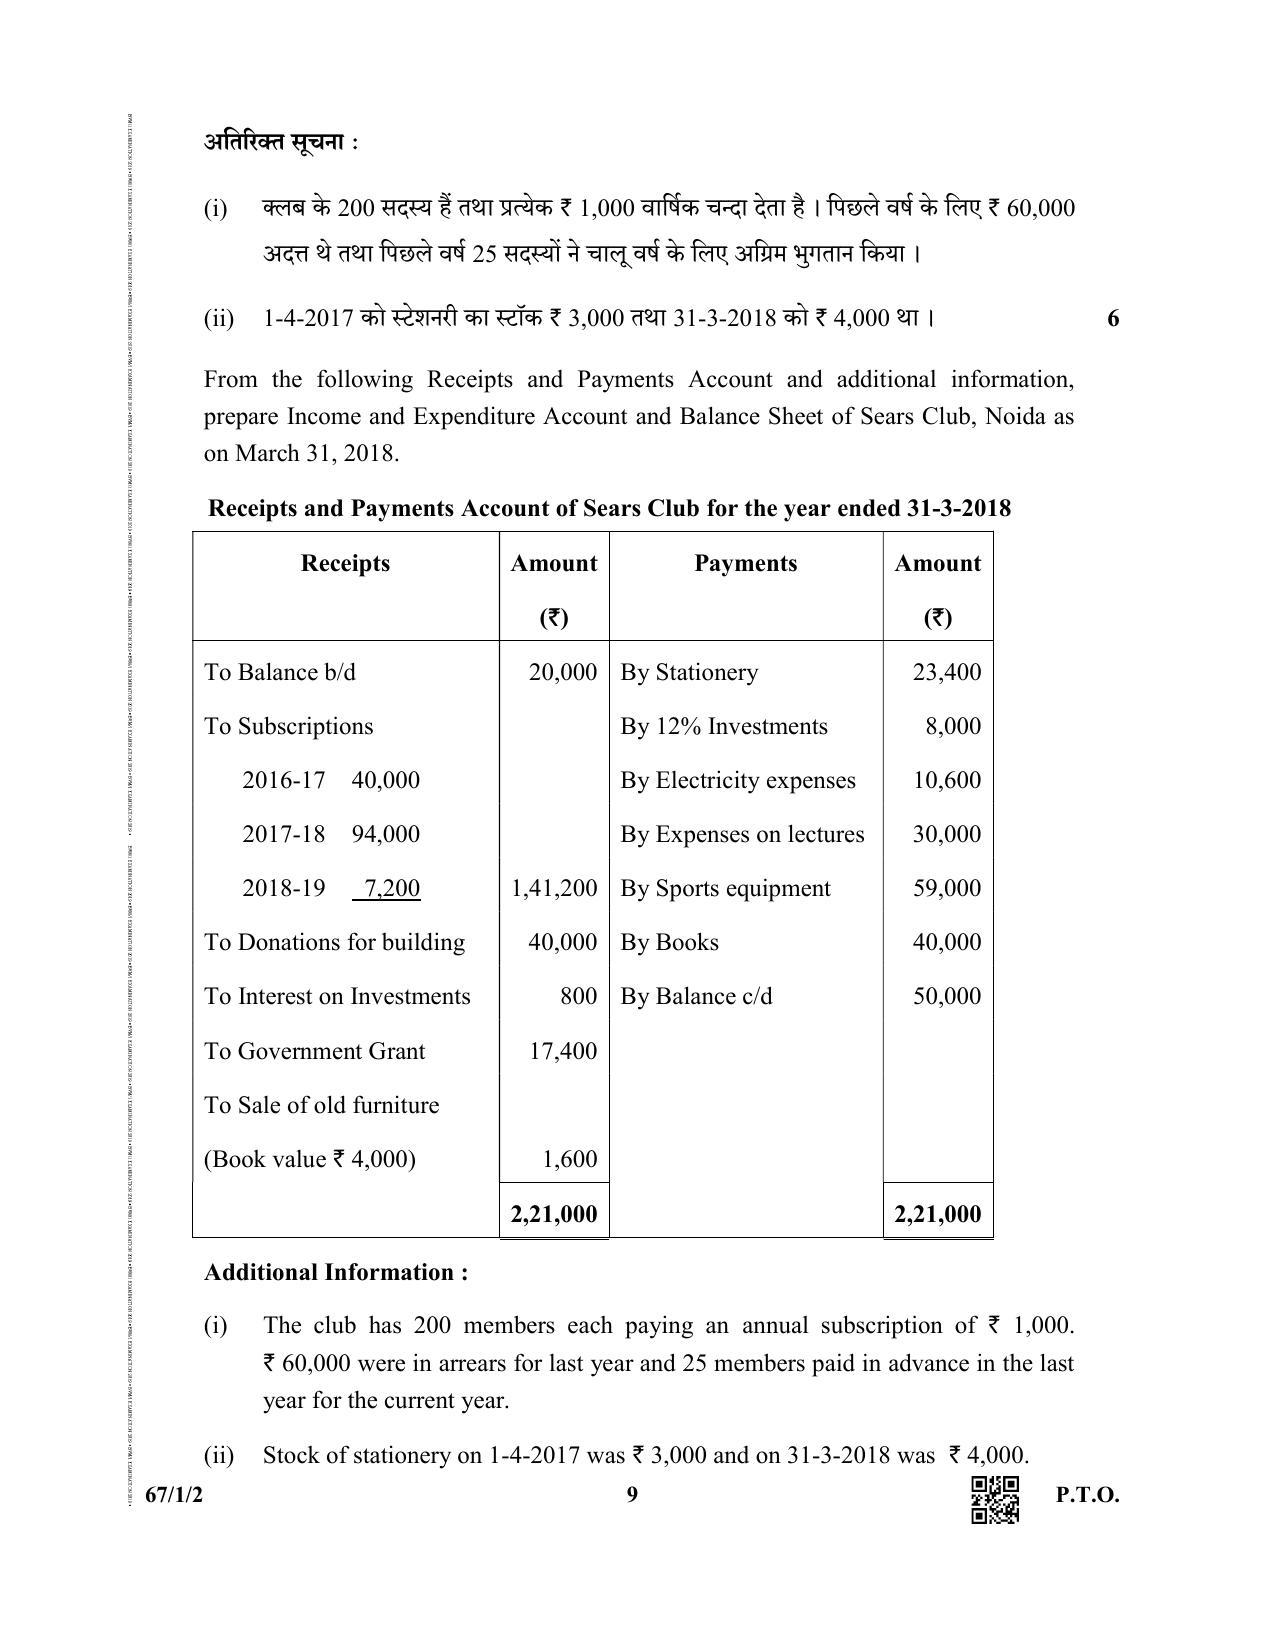 CBSE Class 12 67-1-2  (Accountancy) 2019 Question Paper - Page 9